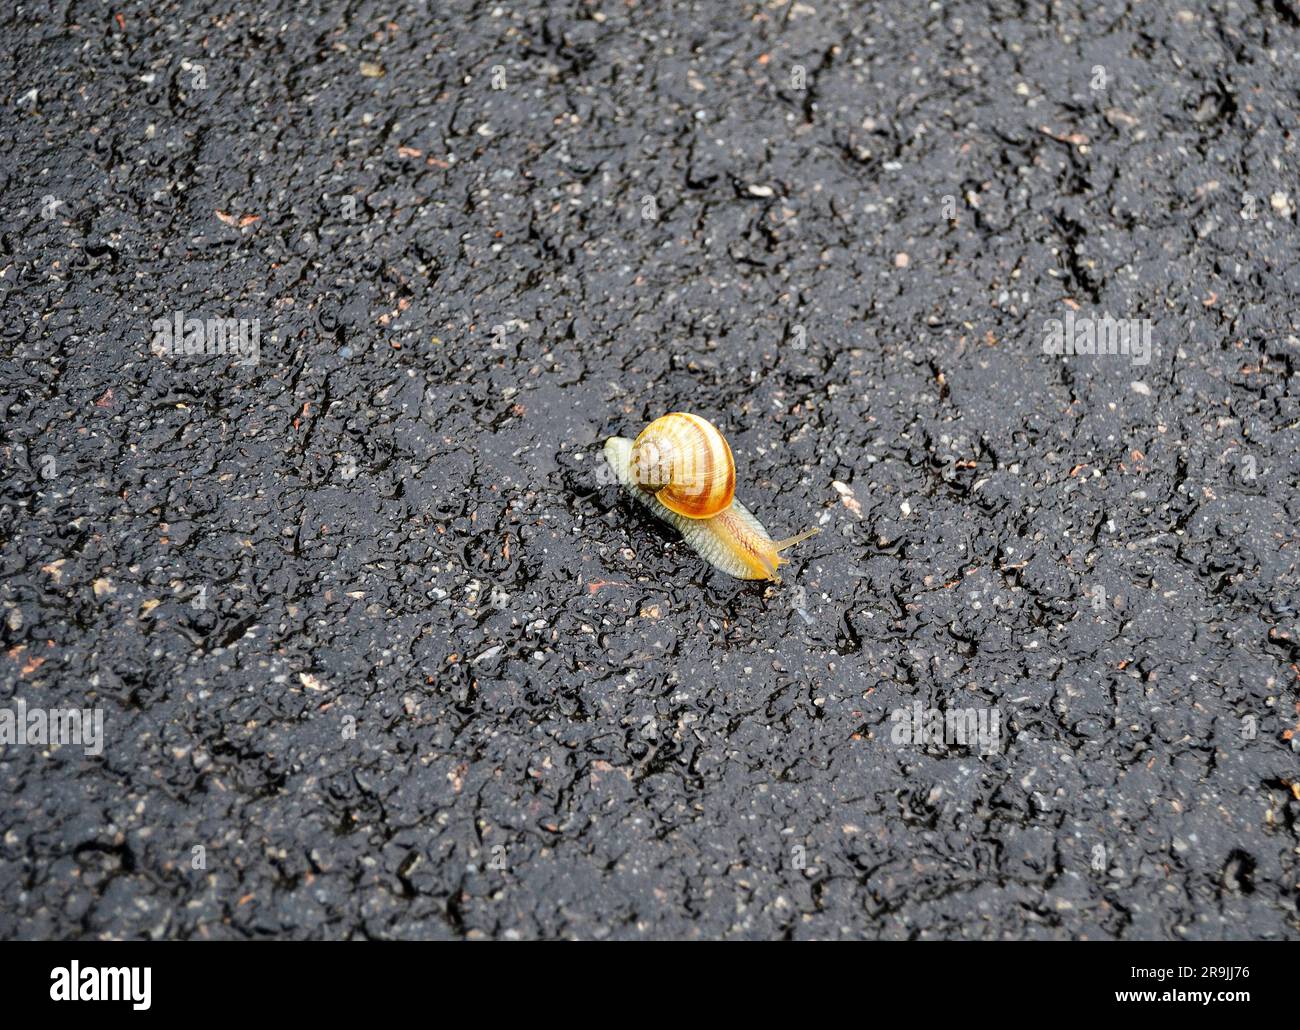 Big garden snail in shell crawling on wet road hurry home, snail Helix consist of edible tasty food coiled shell to protect body, natural animal snail Stock Photo